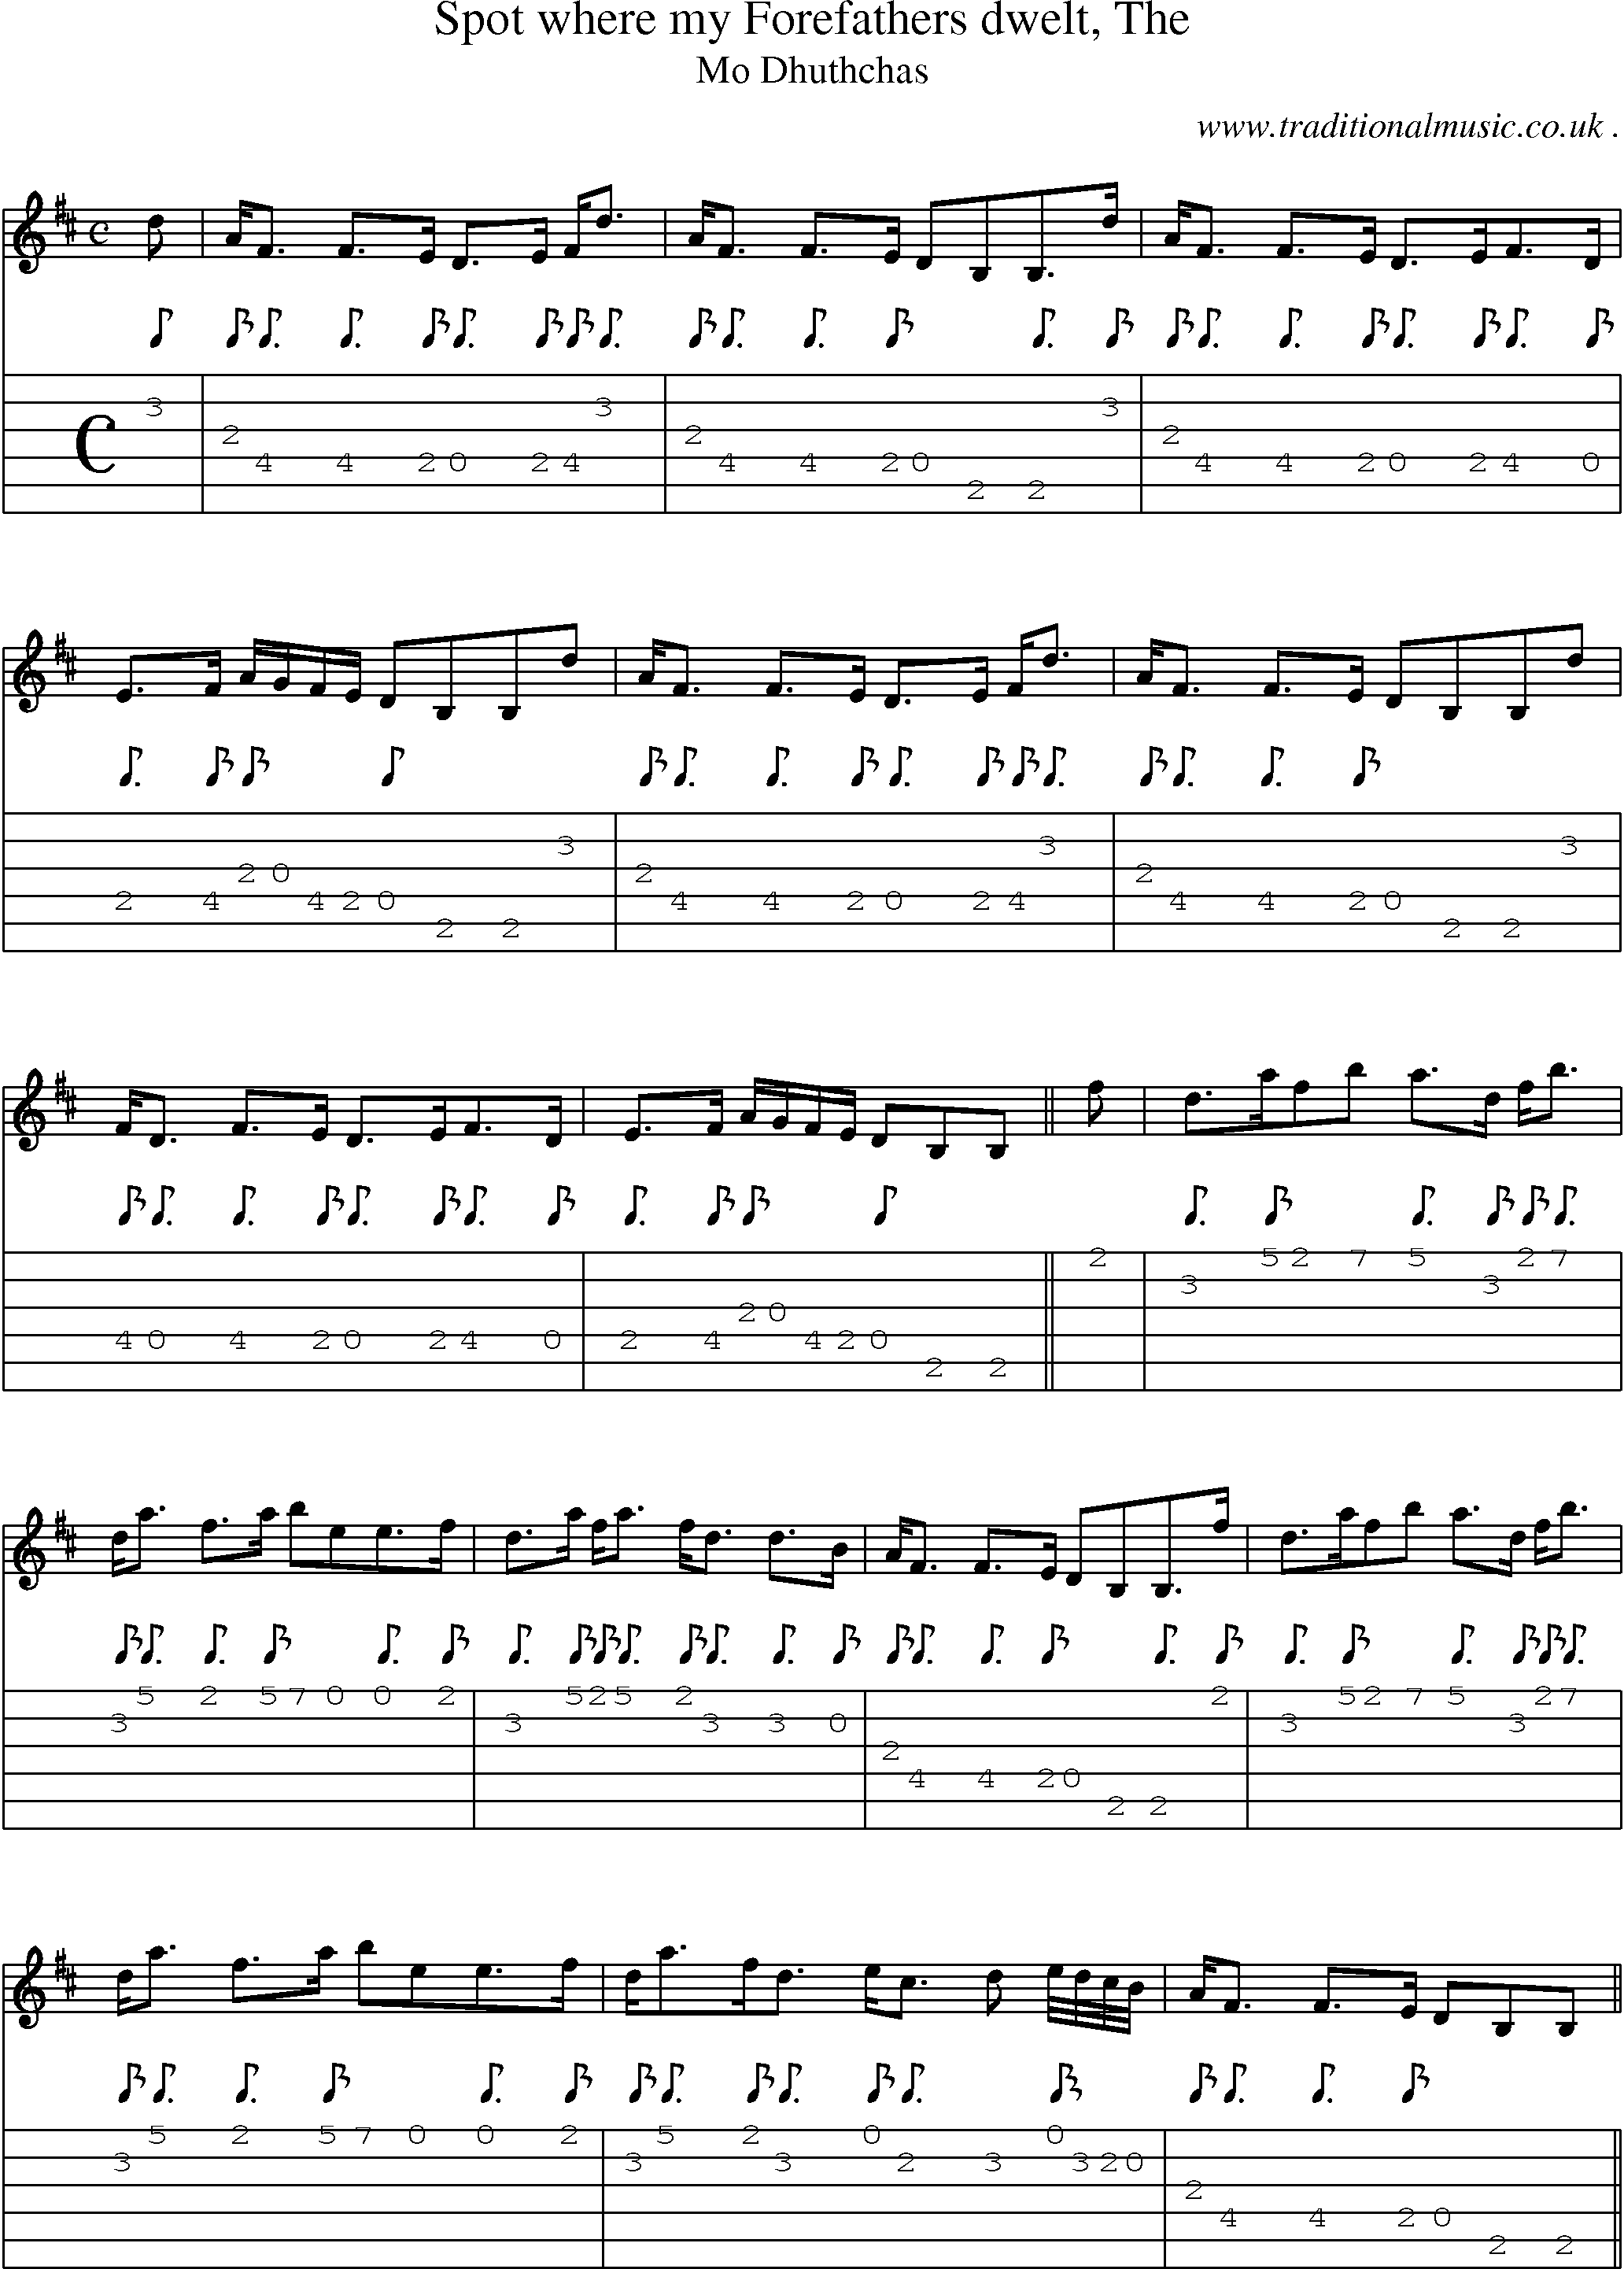 Sheet-music  score, Chords and Guitar Tabs for Spot Where My Forefathers Dwelt The